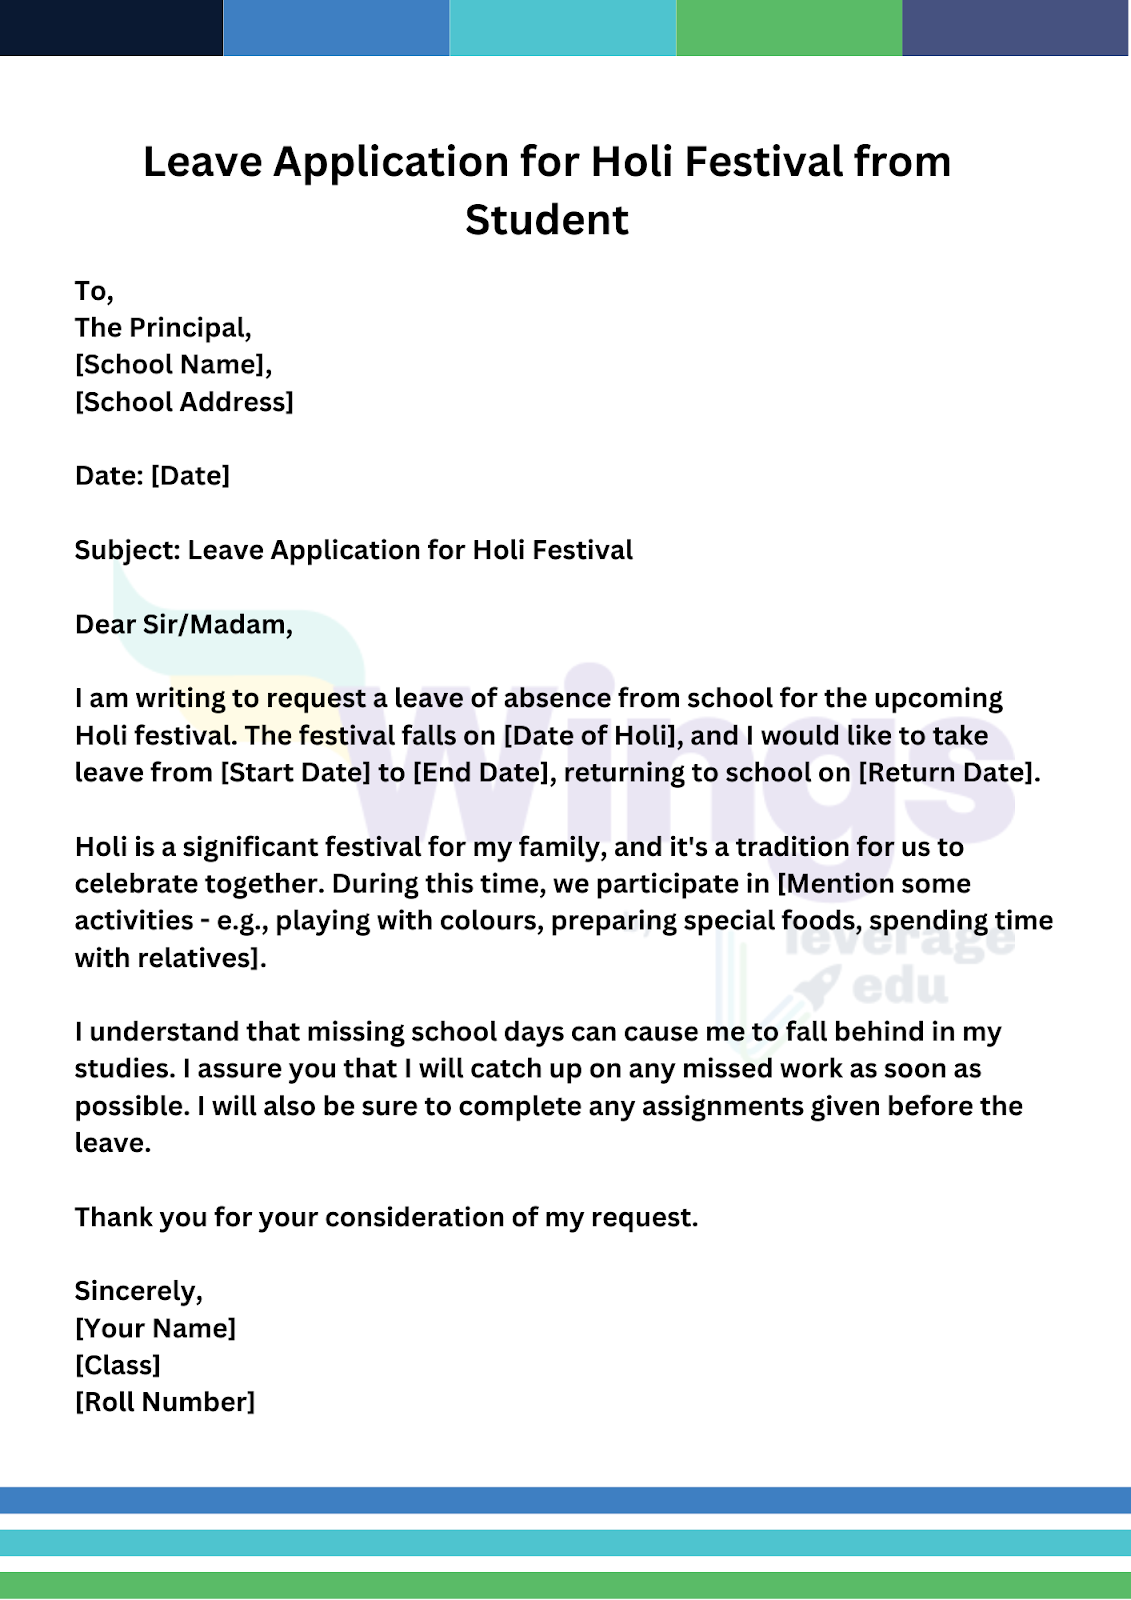 Leave Application for Holi Festival: From a Student